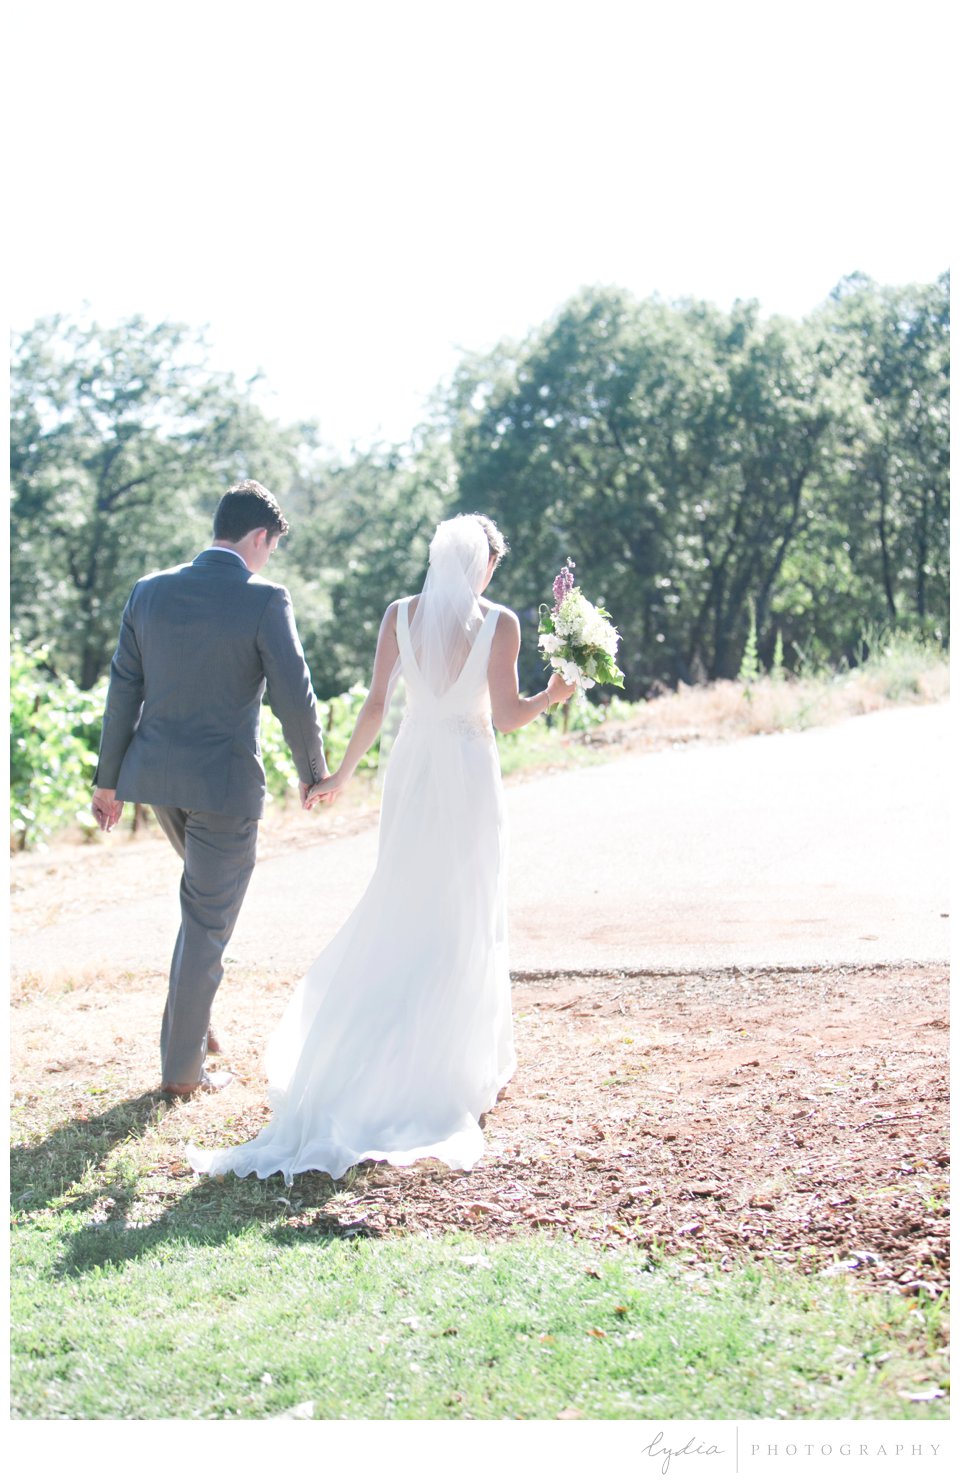 Bride and groom recessional at Lucchesi Vineyards in Grass Valley, California.